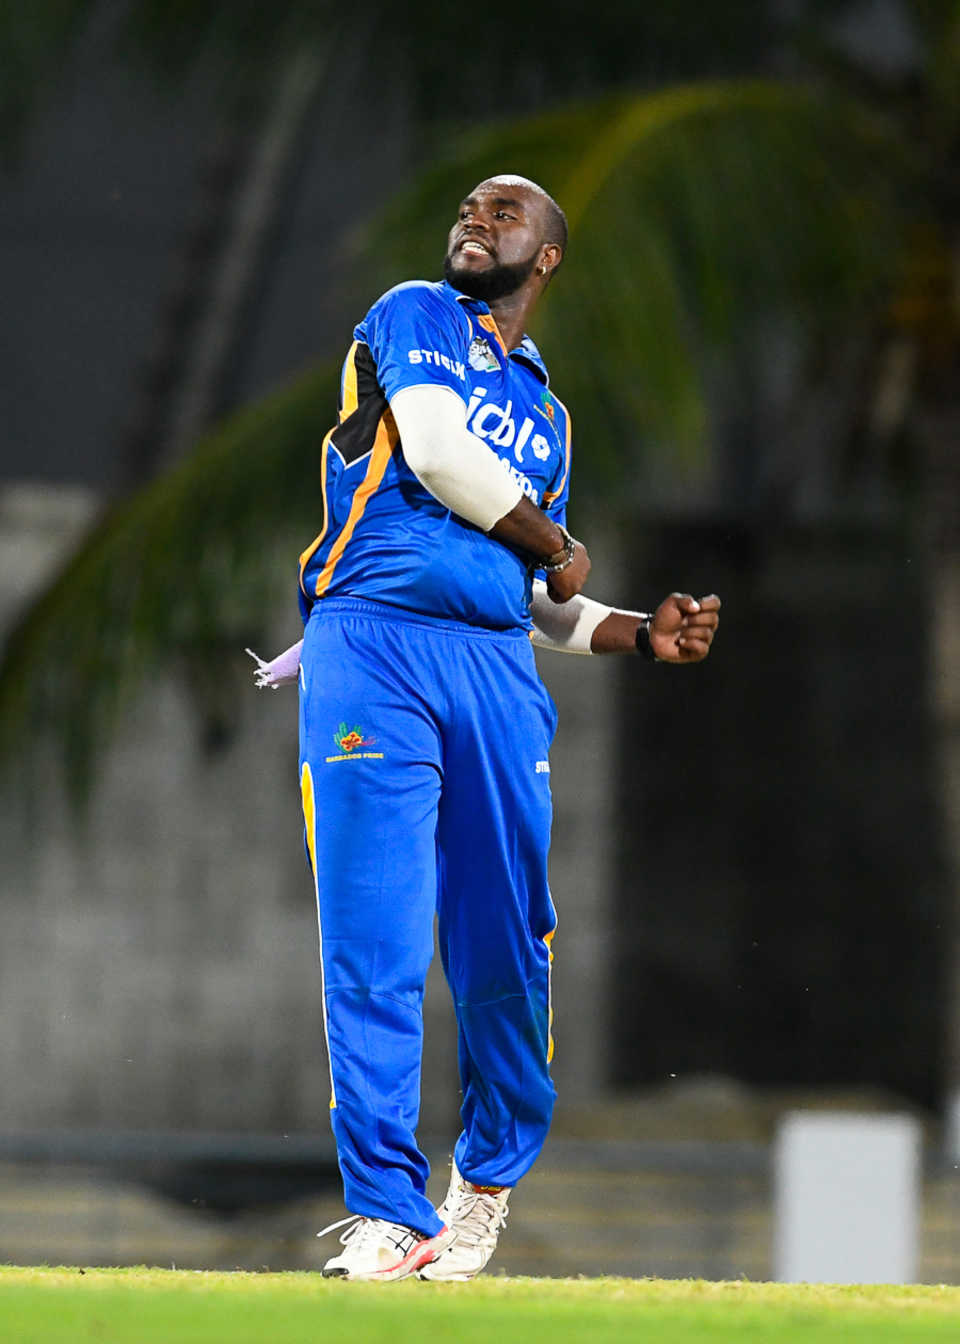 Ashley Nurse celebrates after taking one of his four wickets